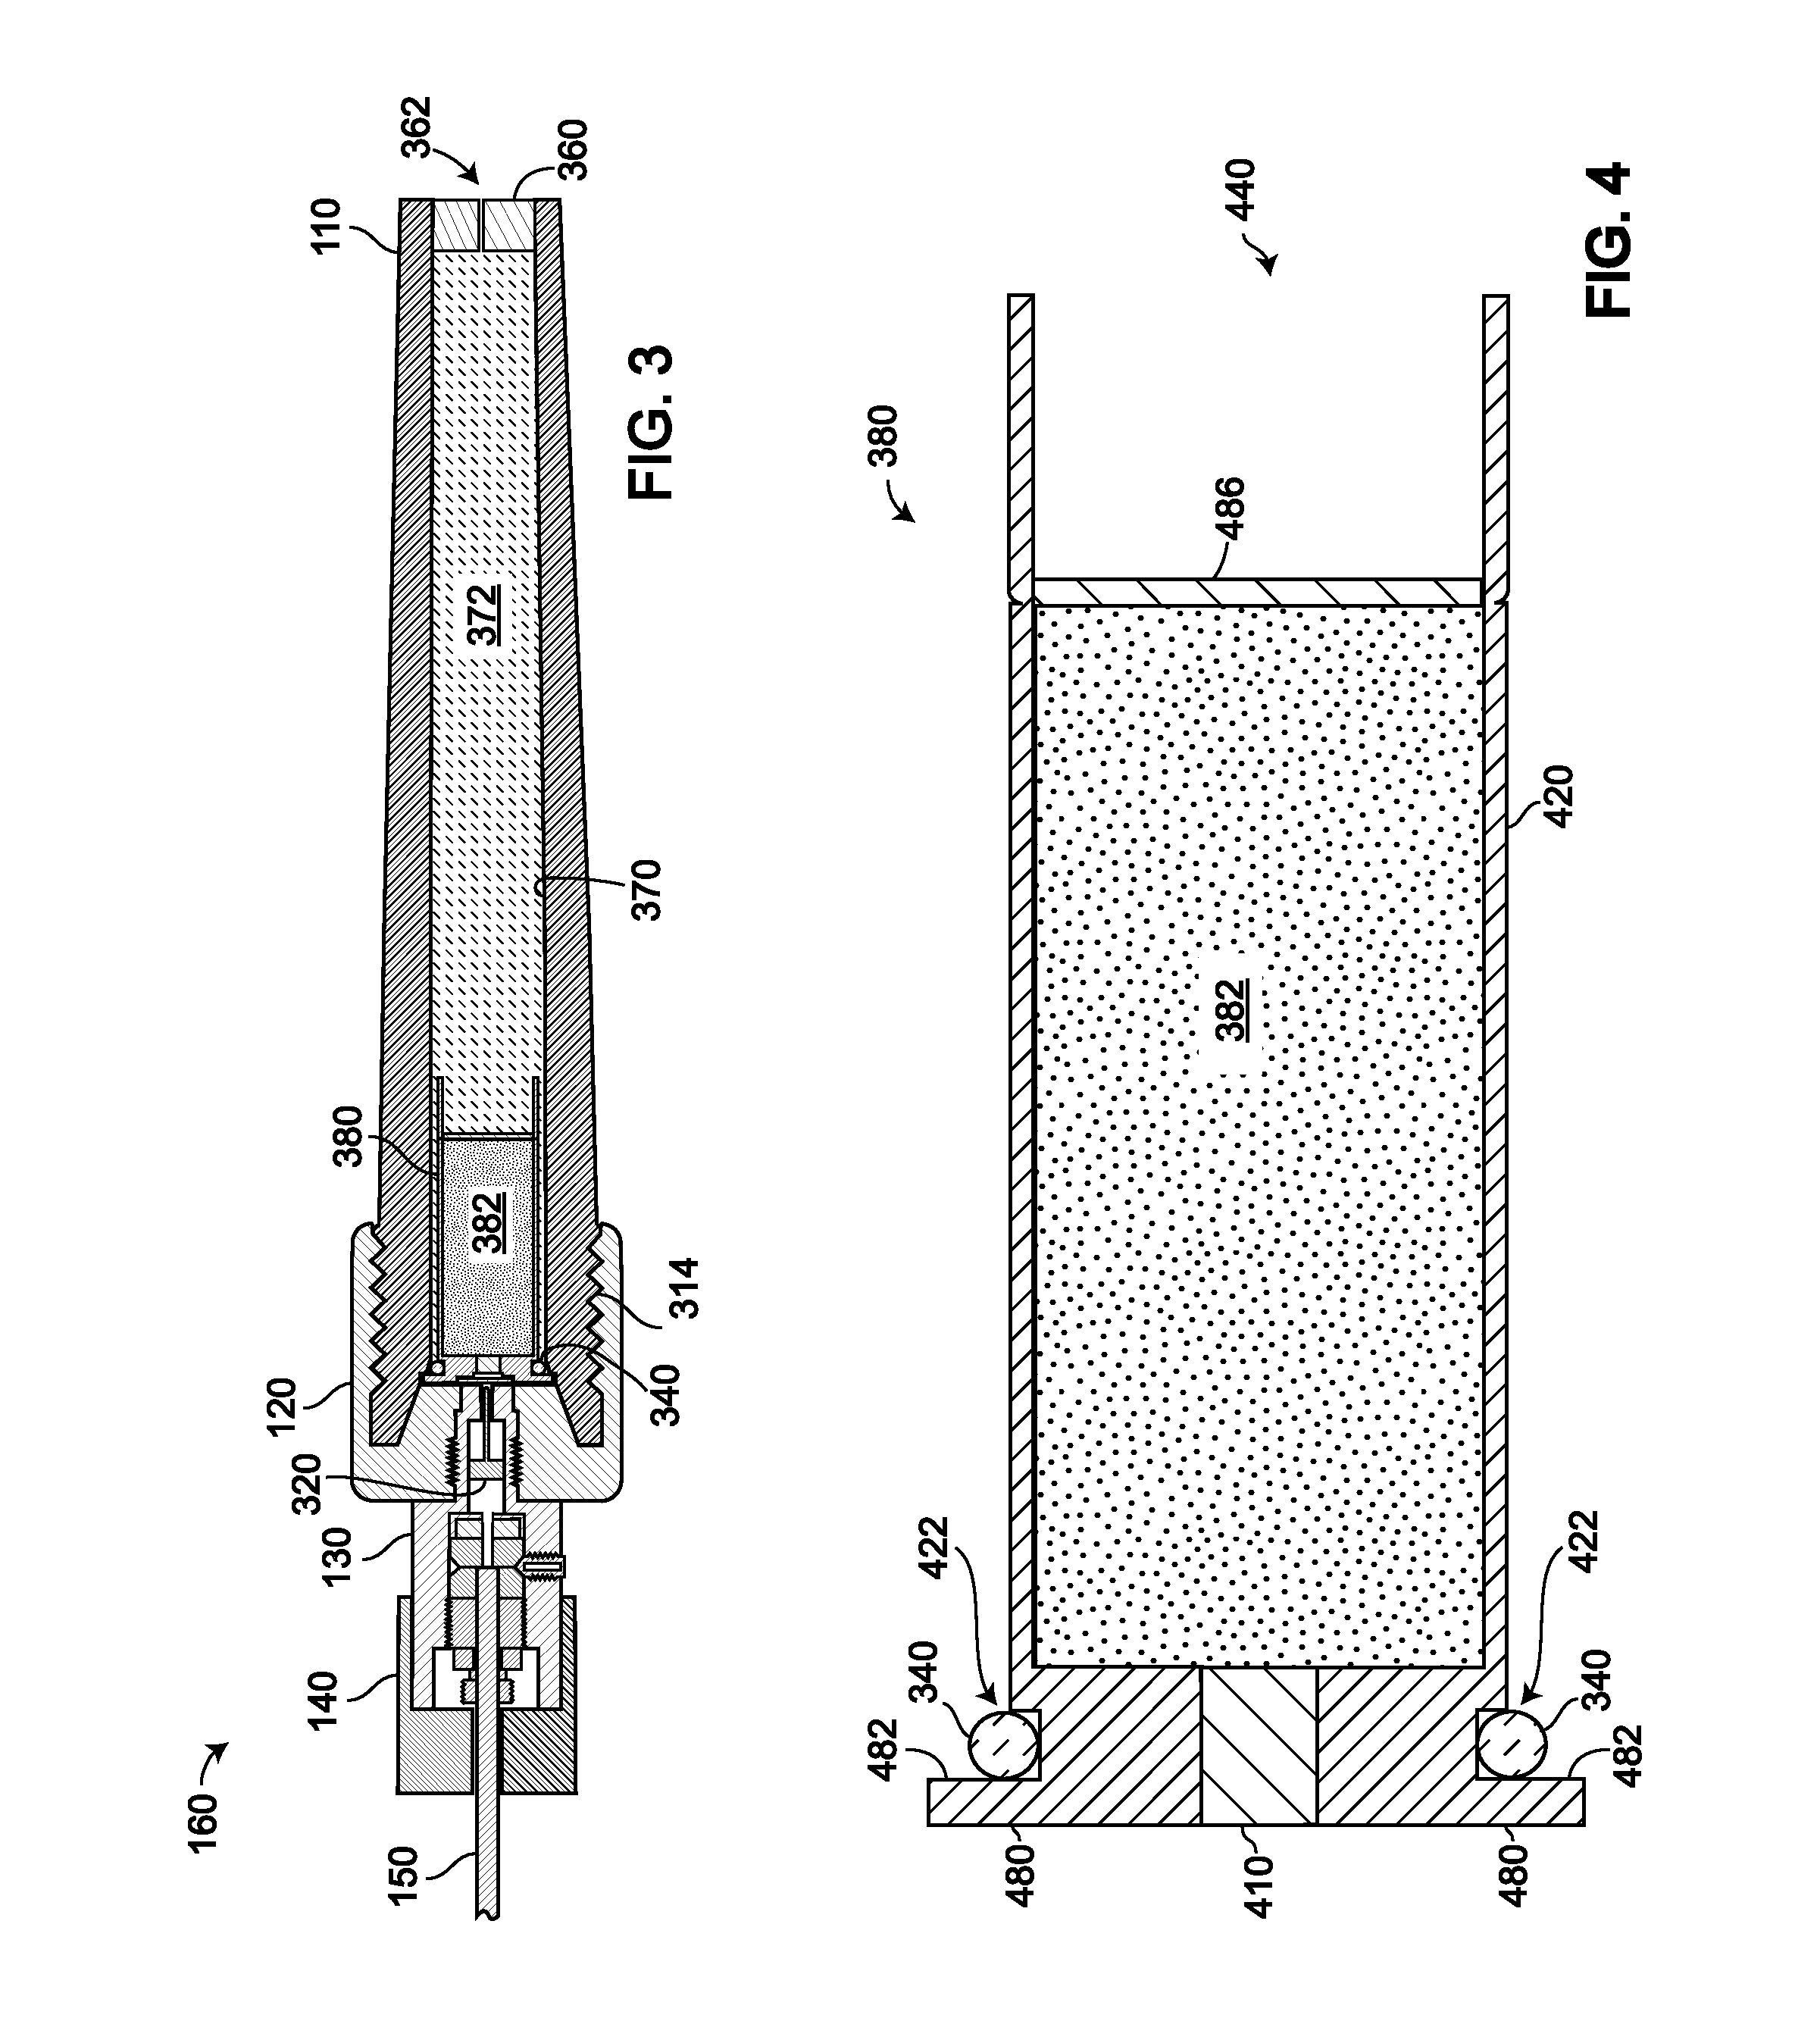 Systems and methods for launching water from a disrupter cannon